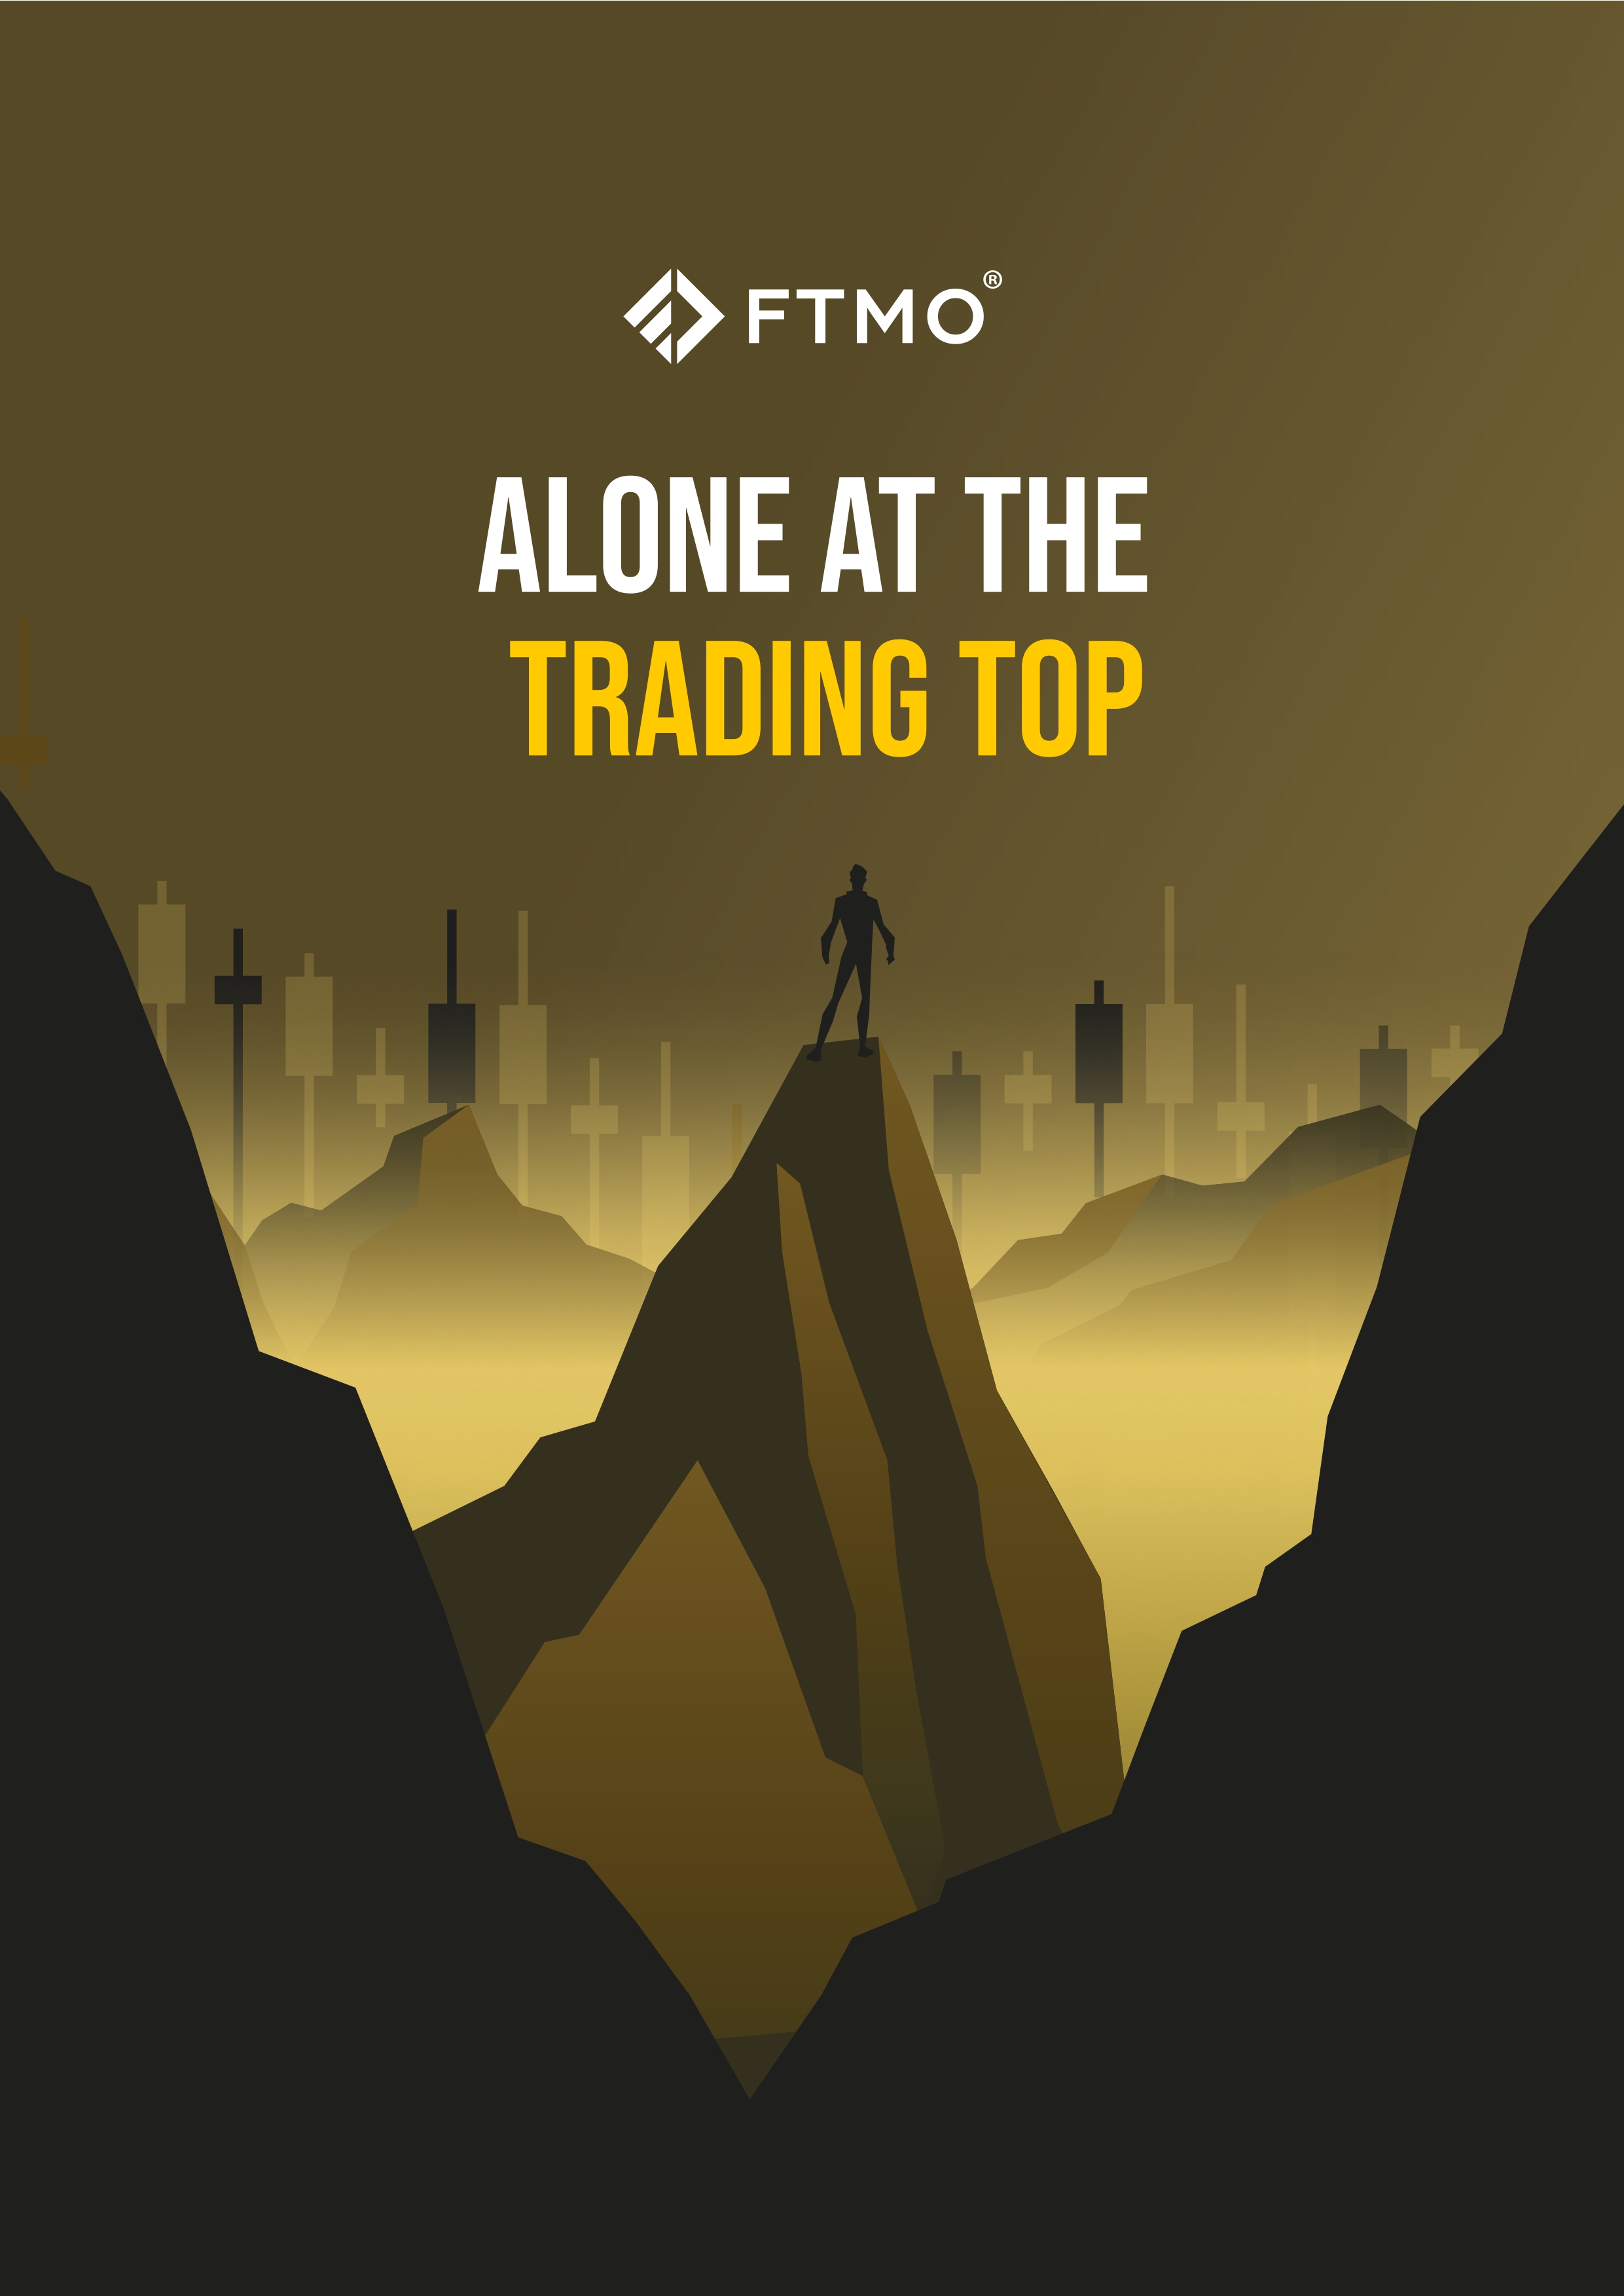 Alone at the trading top